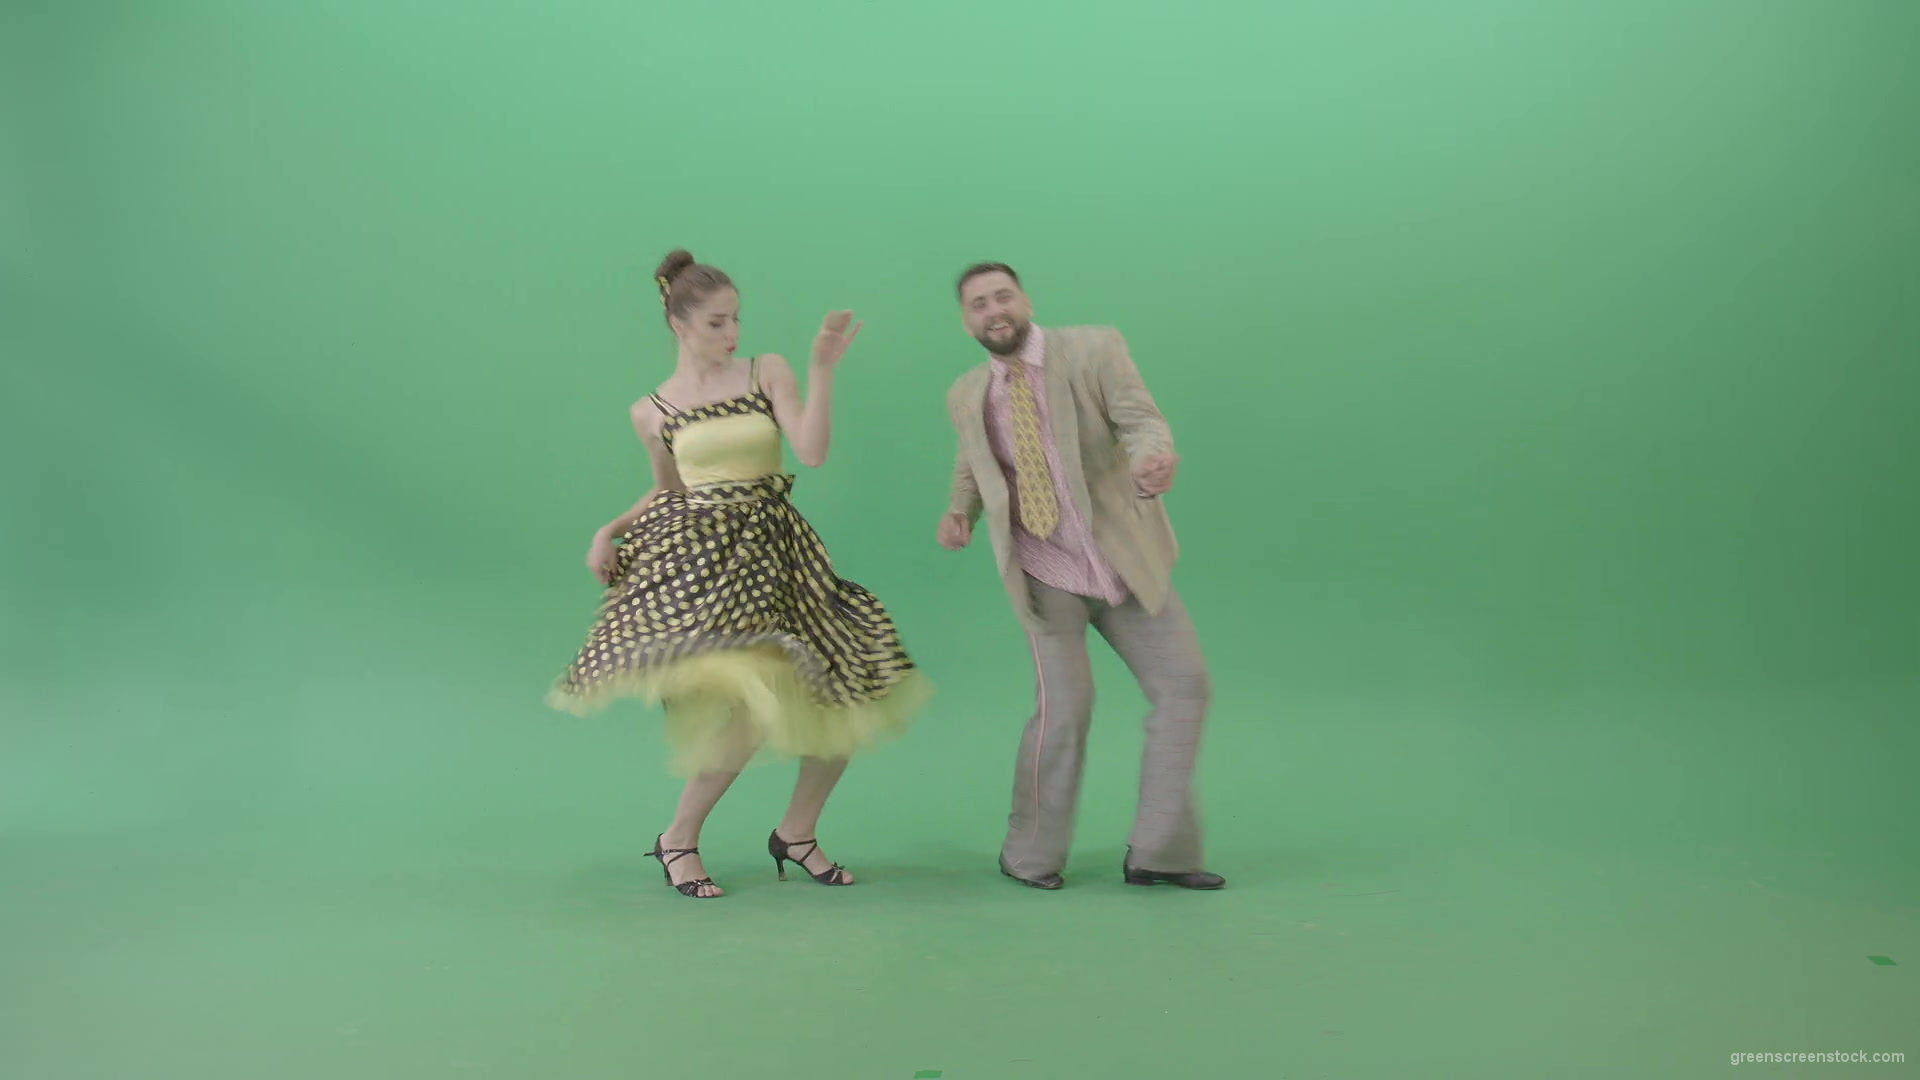 Happy-Man-and-woman-dancing-Boogie-woogie-moves-and-rock-and-roll-over-Green-Screen-4K-Video-Footage-1920_007 Green Screen Stock